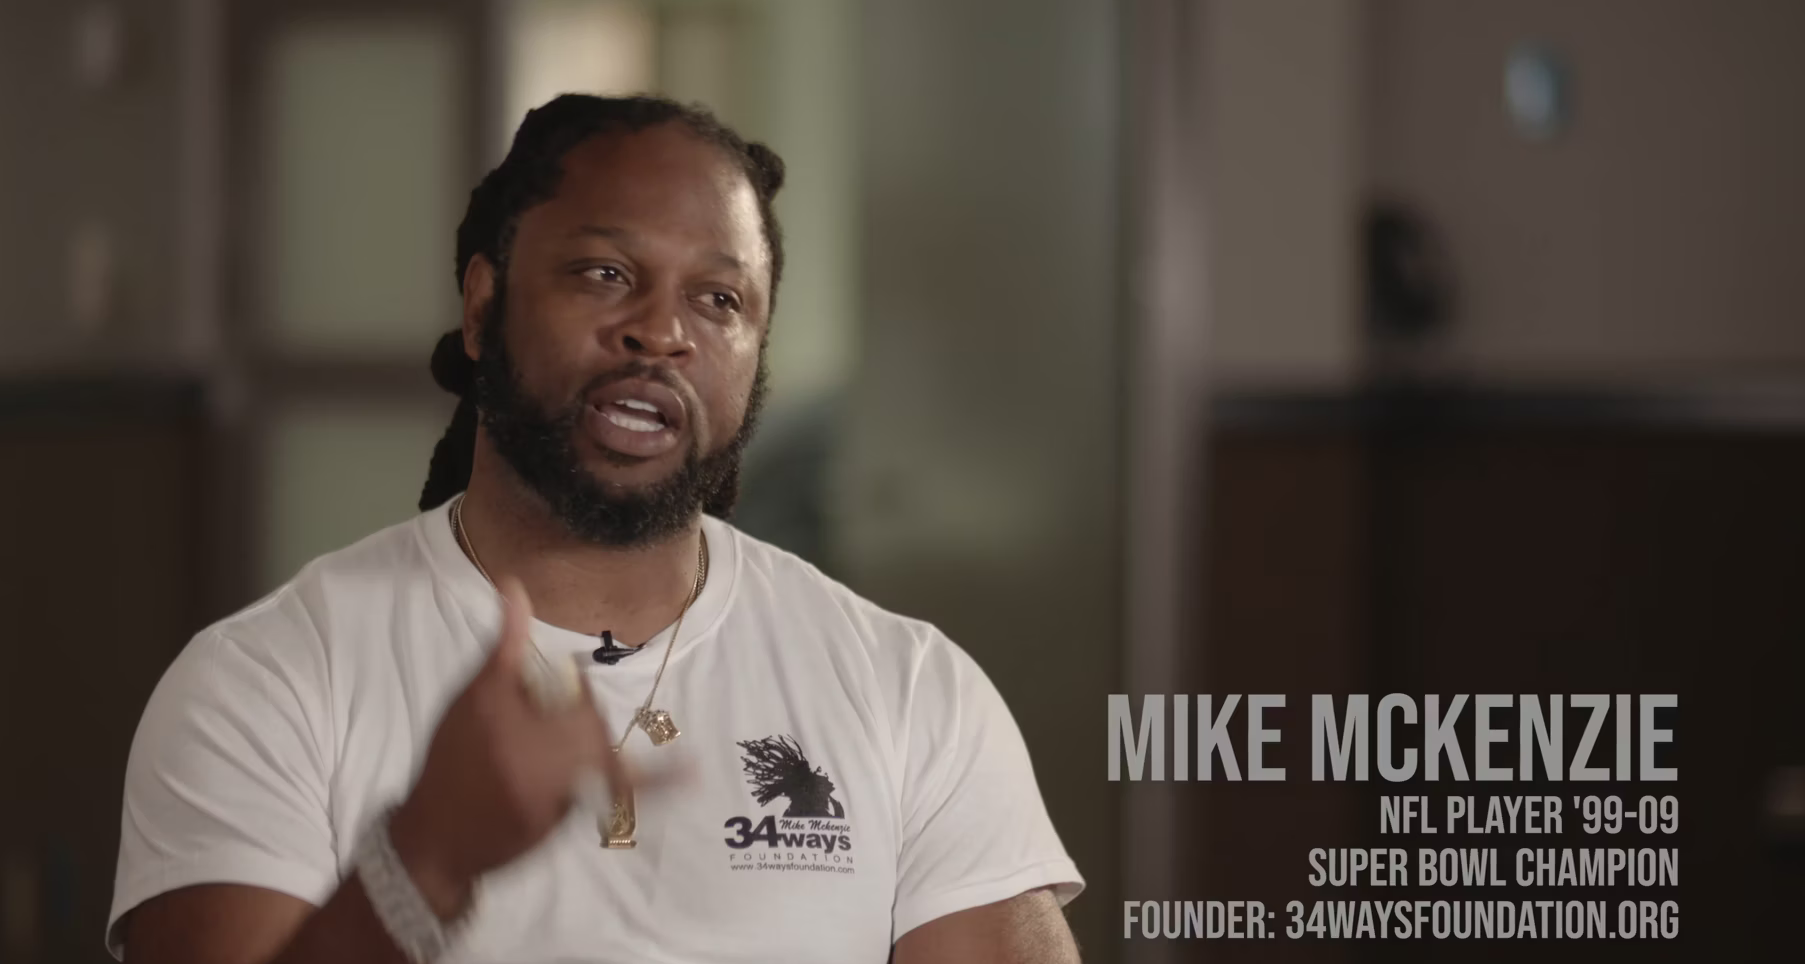 NFL Player Mike McKenzie: Disconnect for Connection